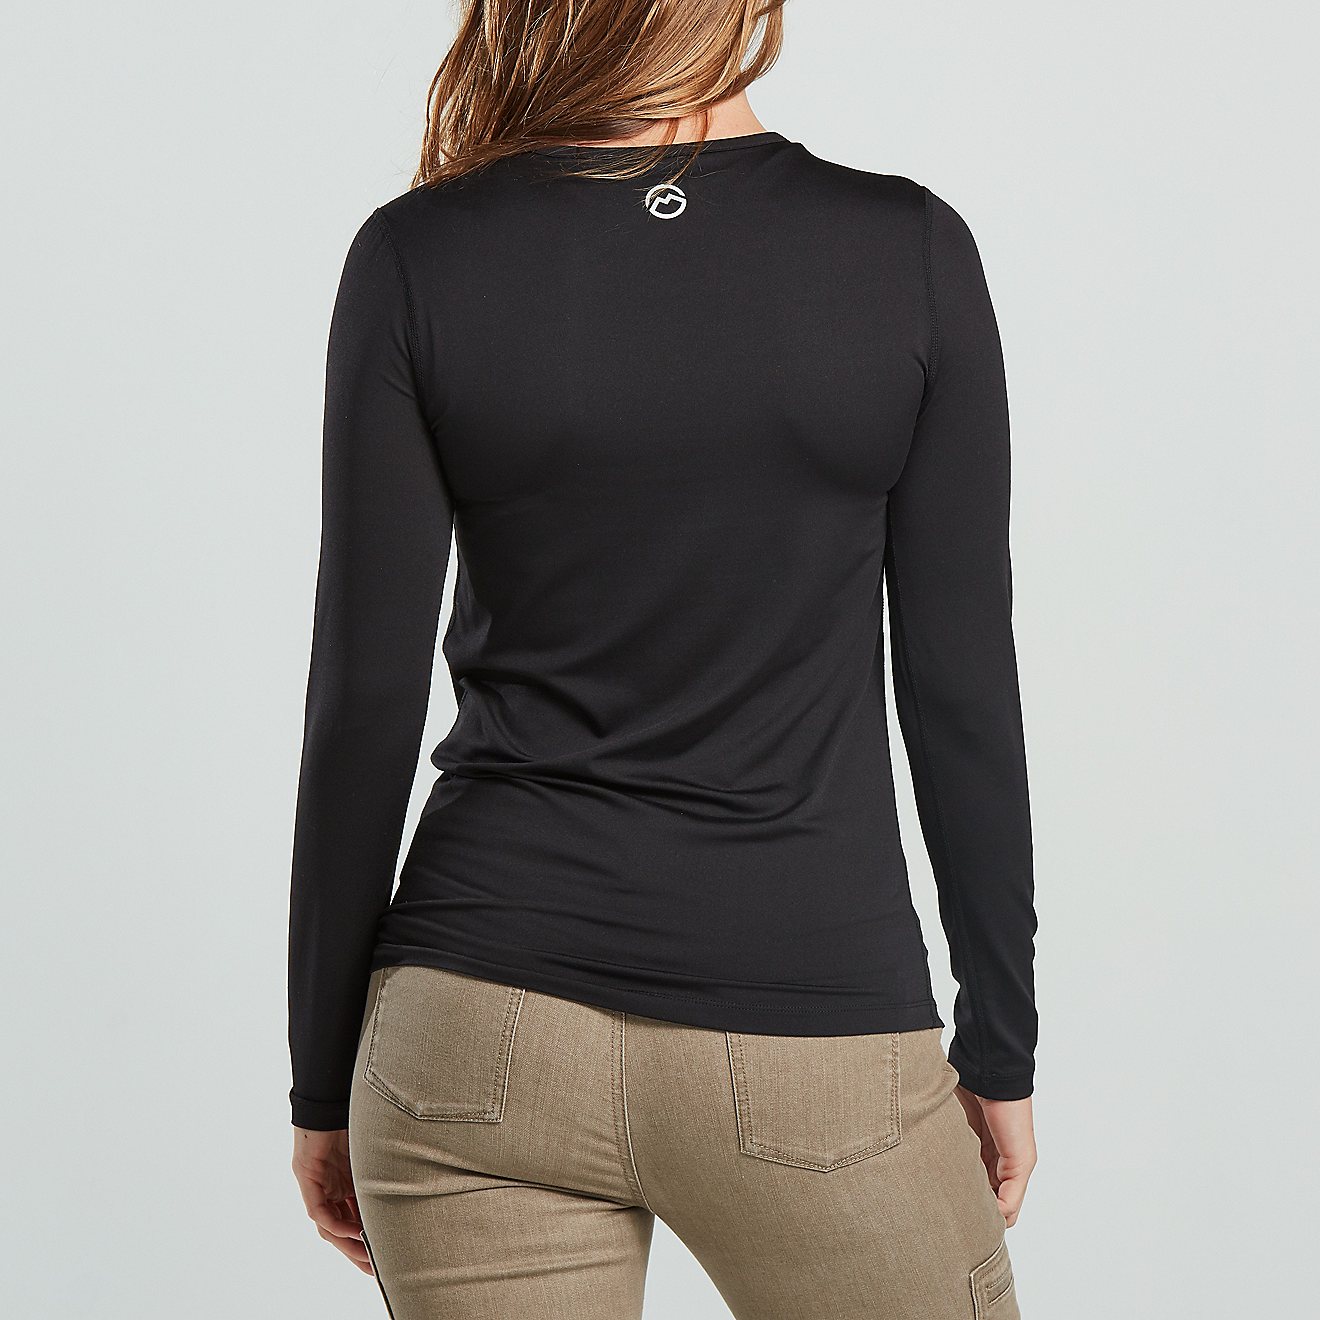 Magellan Outdoors Women's Thermal 2.0 Midweight Baselayer                                                                        - view number 2